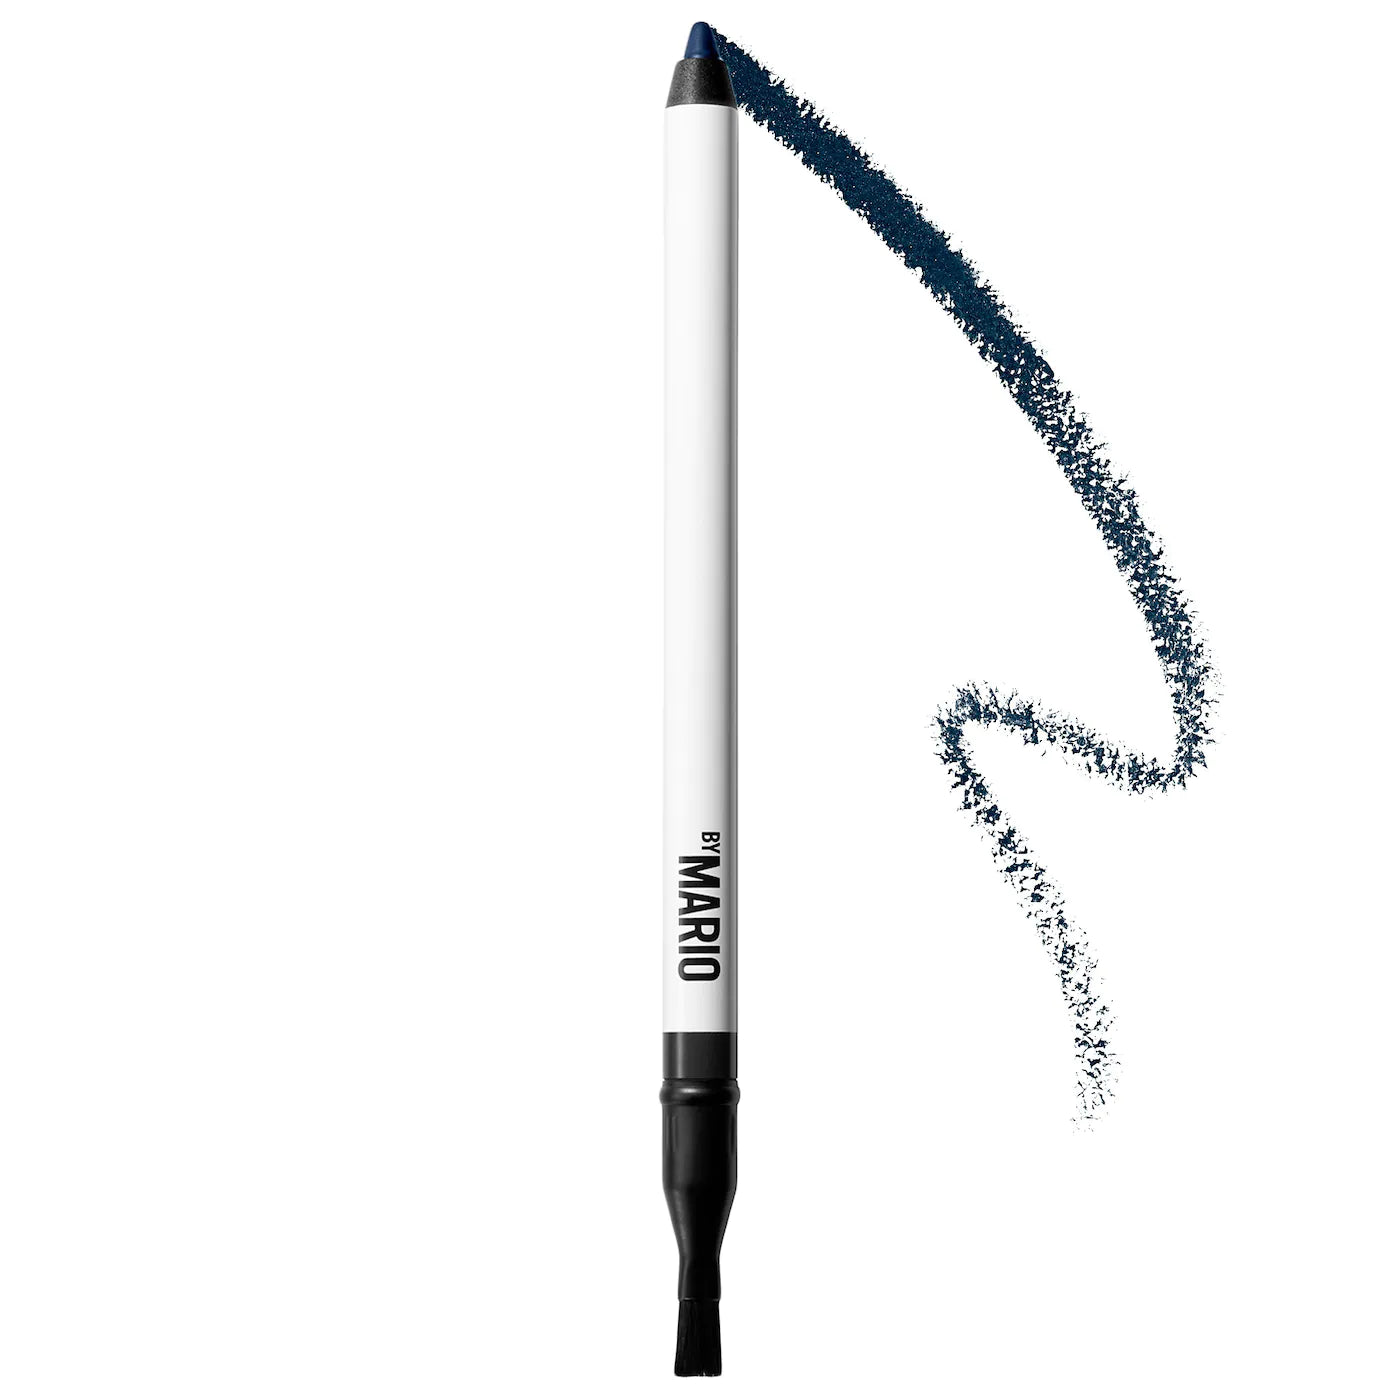 MAKEUP BY MARIO - Master Pigment Pro™ Eyeliner Pencil | 1.1 g